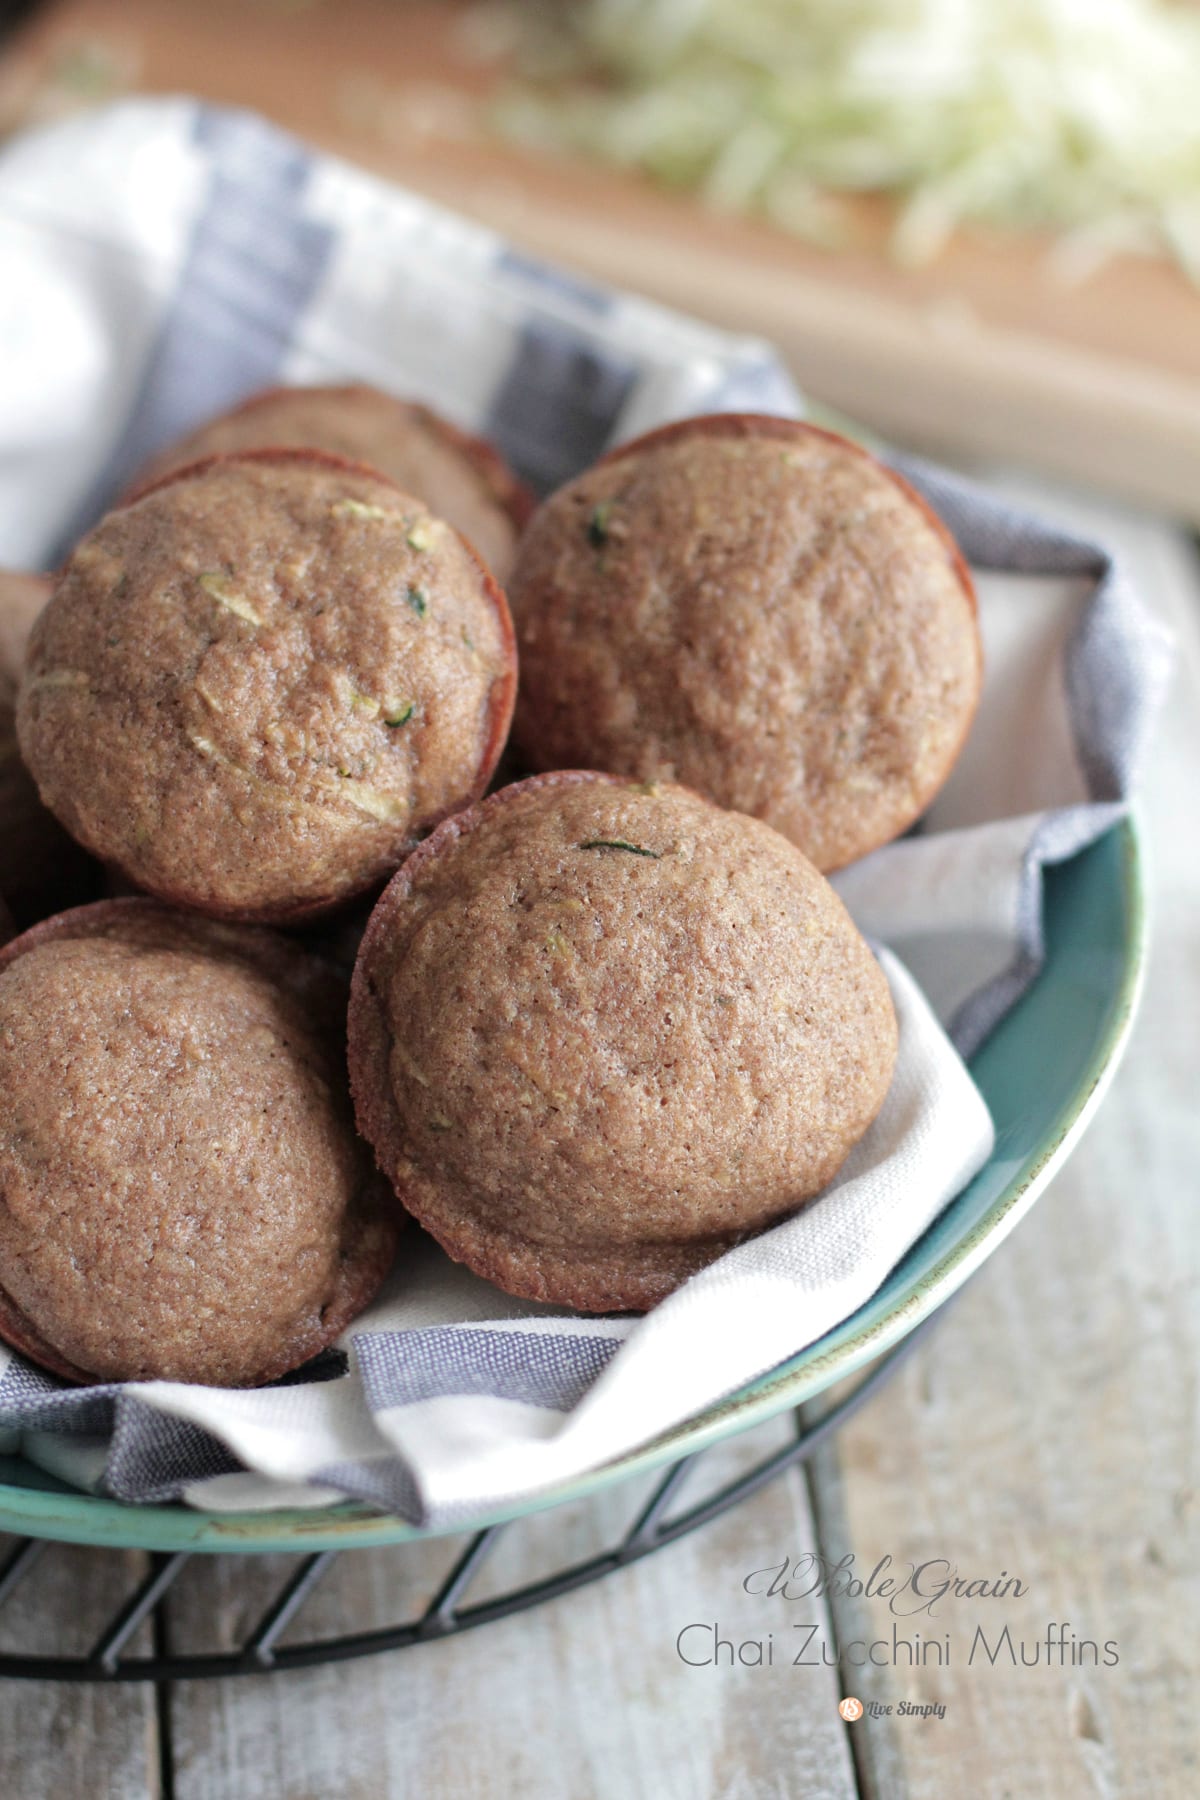 The best way to use zucchini!! These whole grain chai zucchini muffins are sooo good!